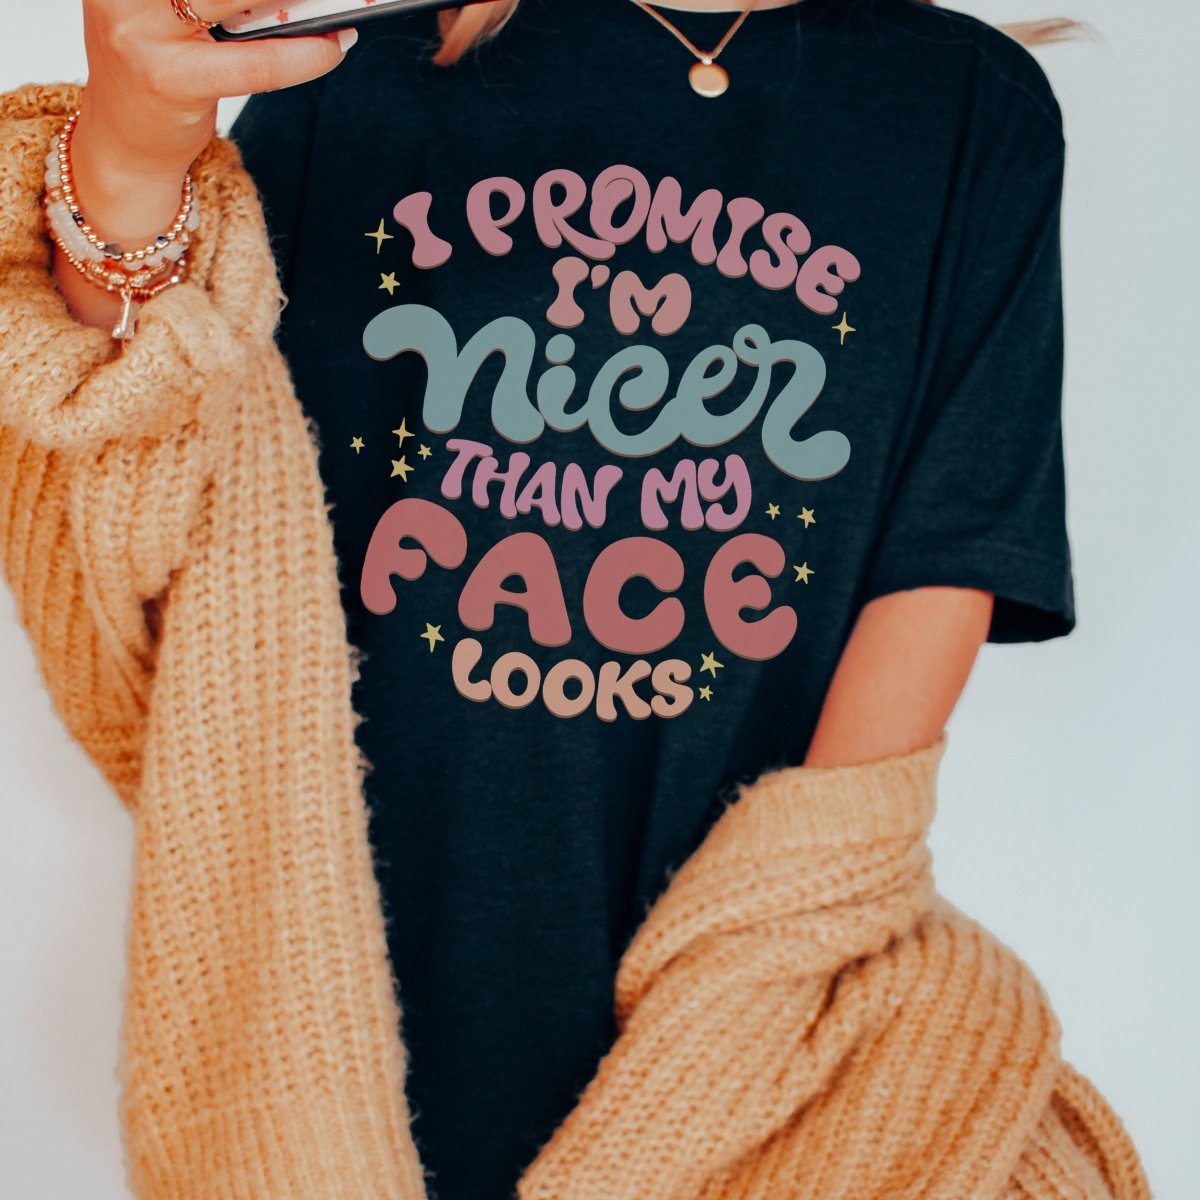 Nicer than my face looks tee - Limeberry Designs